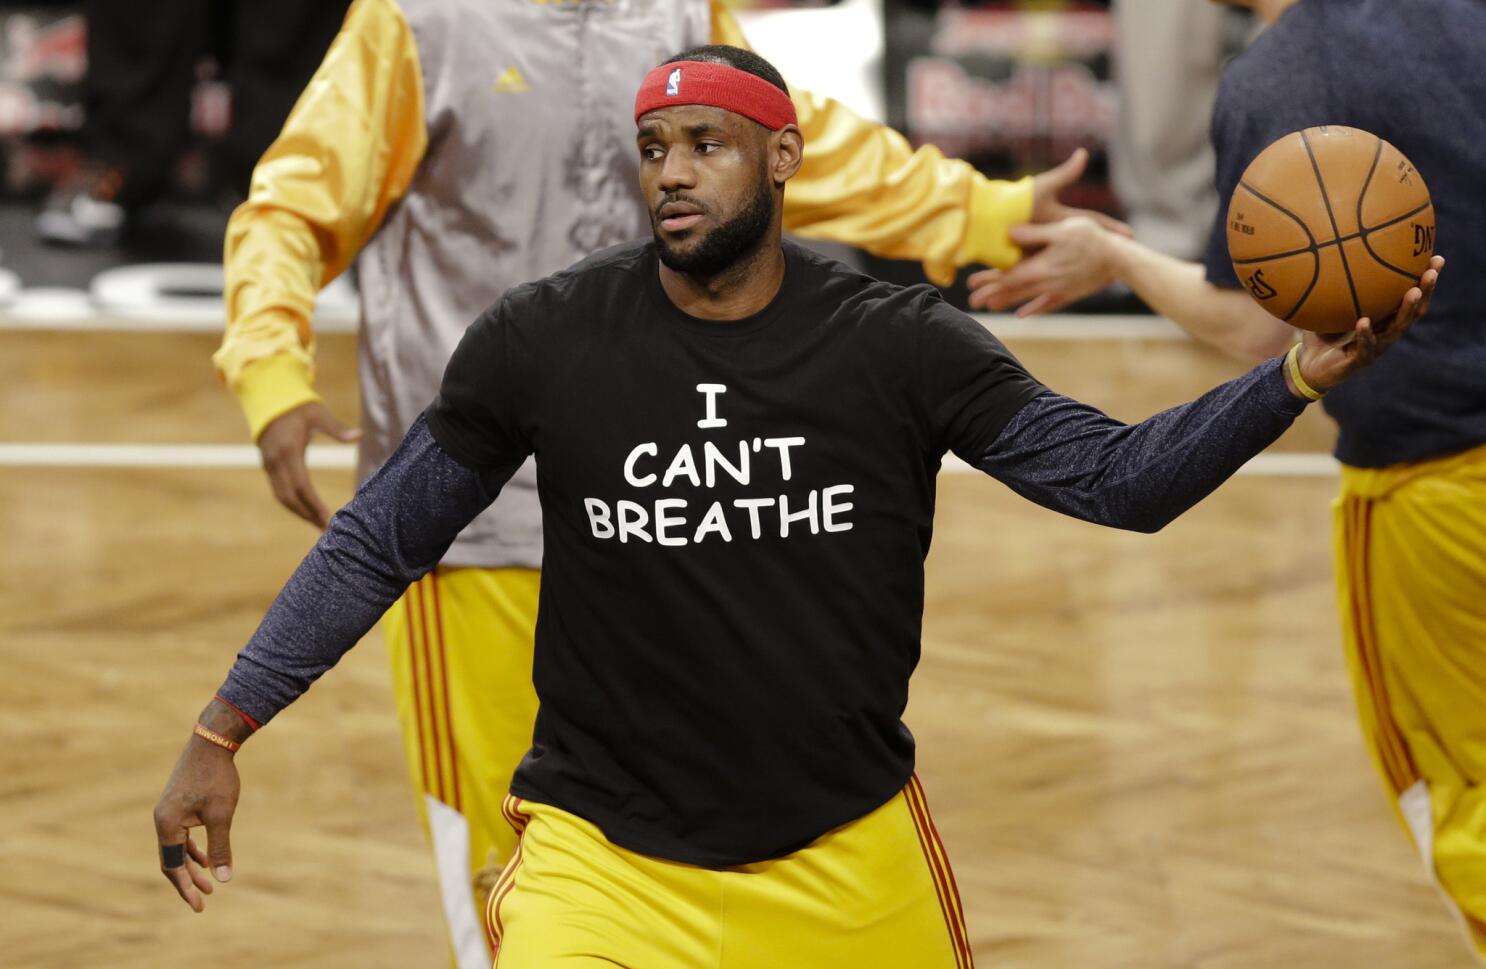 NBA and NFL players voice their opinions on the Eric Garner